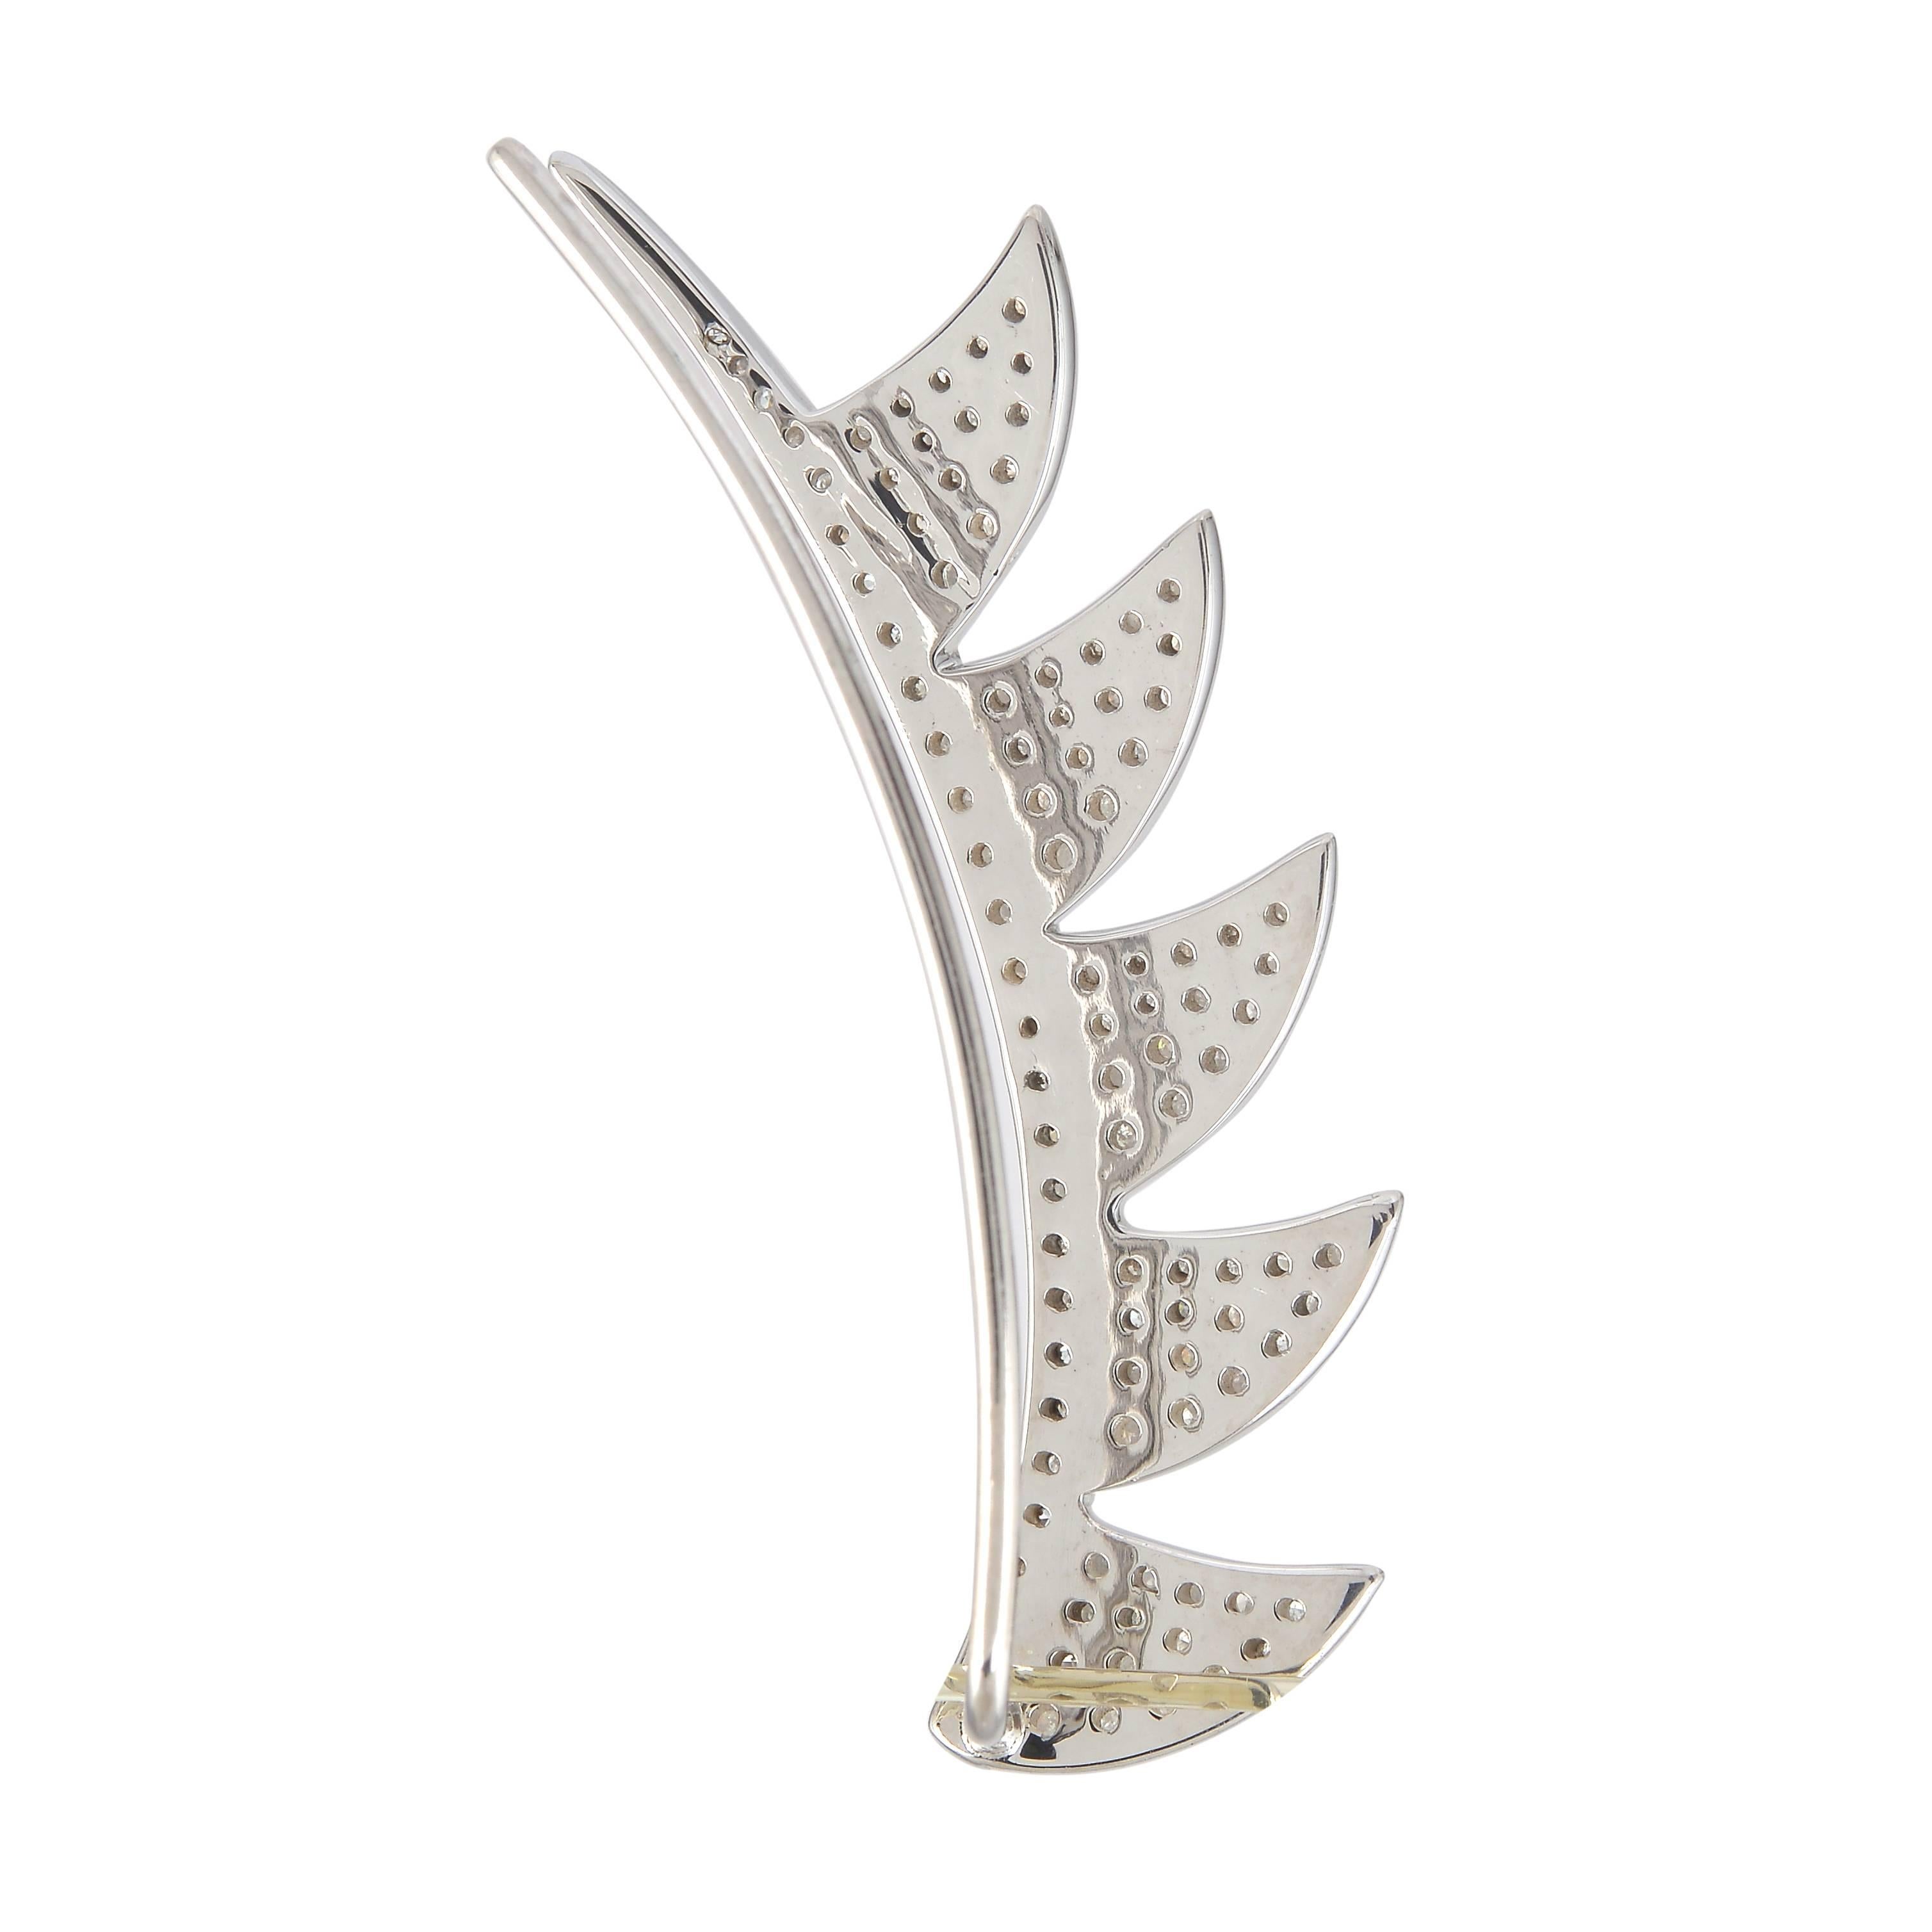 Your style is sharp, striking and ultra-modern. This single Claw ear climber falls right in line with your confident sophistication. The sterling silver pave claw arches is set with sparkling diamonds. The post connects to the bottom of the ear